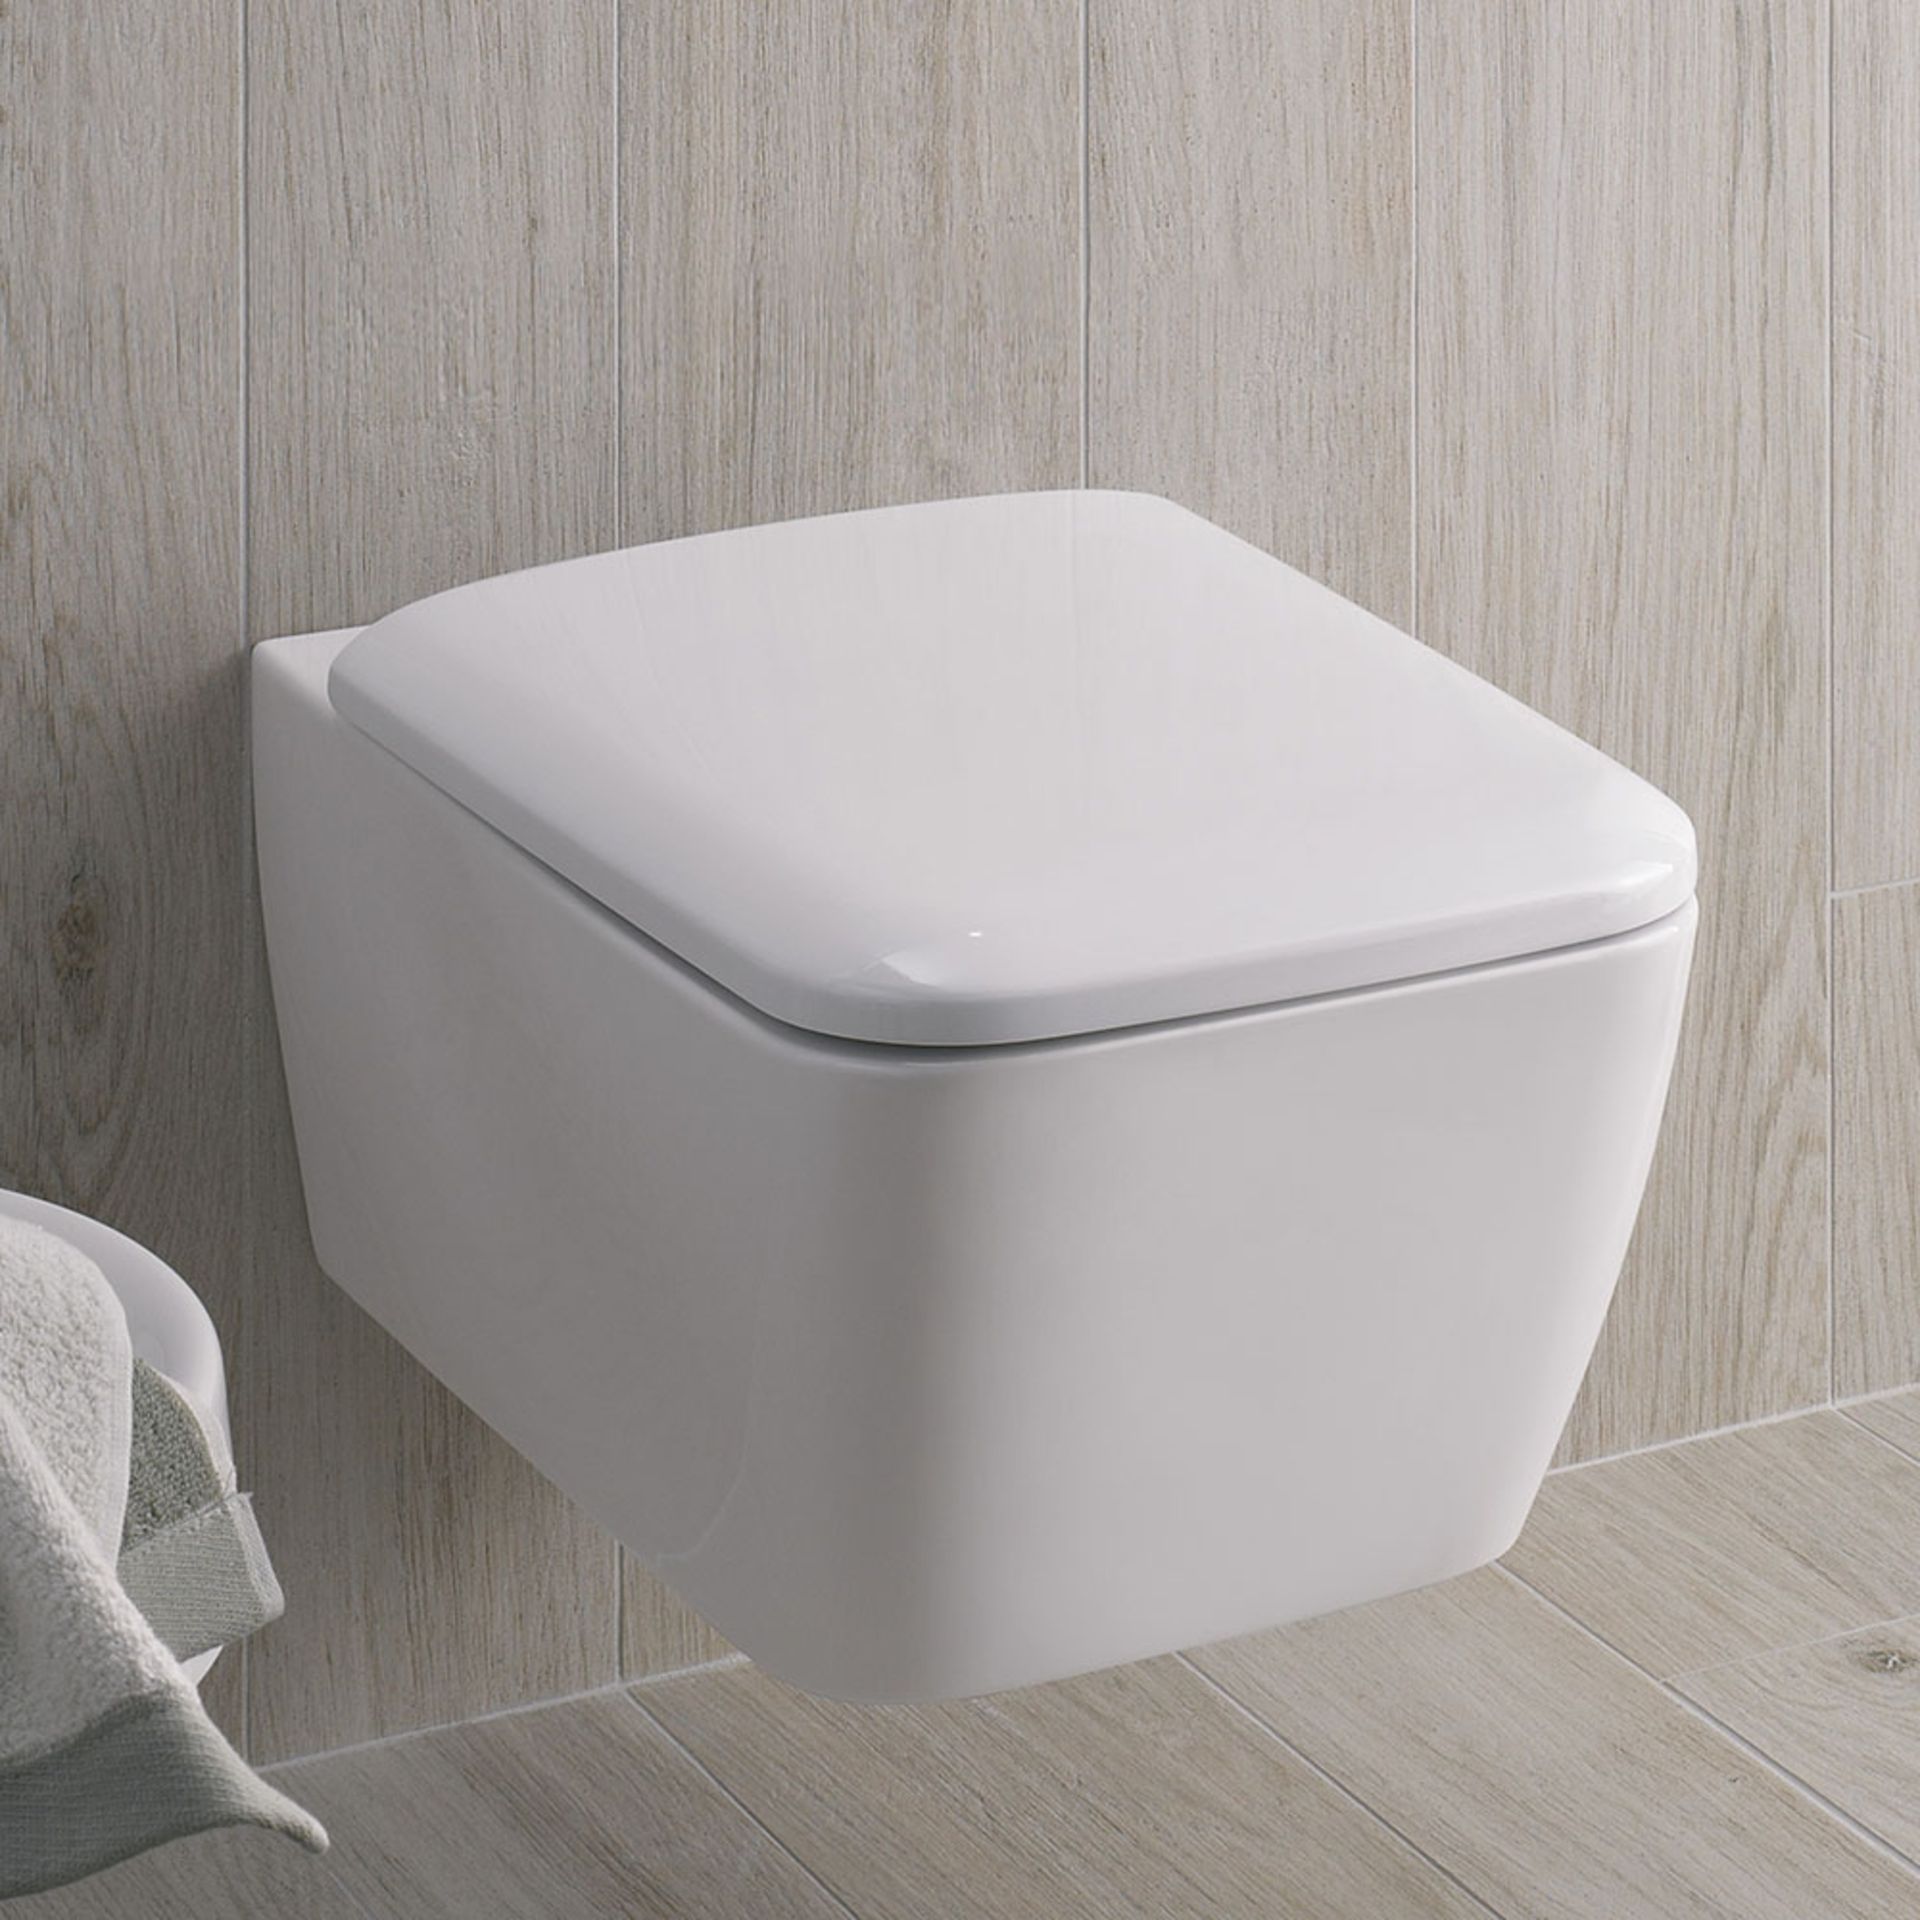 Keramag It! Back to wall Toilet Pan. The complete bathroom it!Brings clear modernity to the bat...